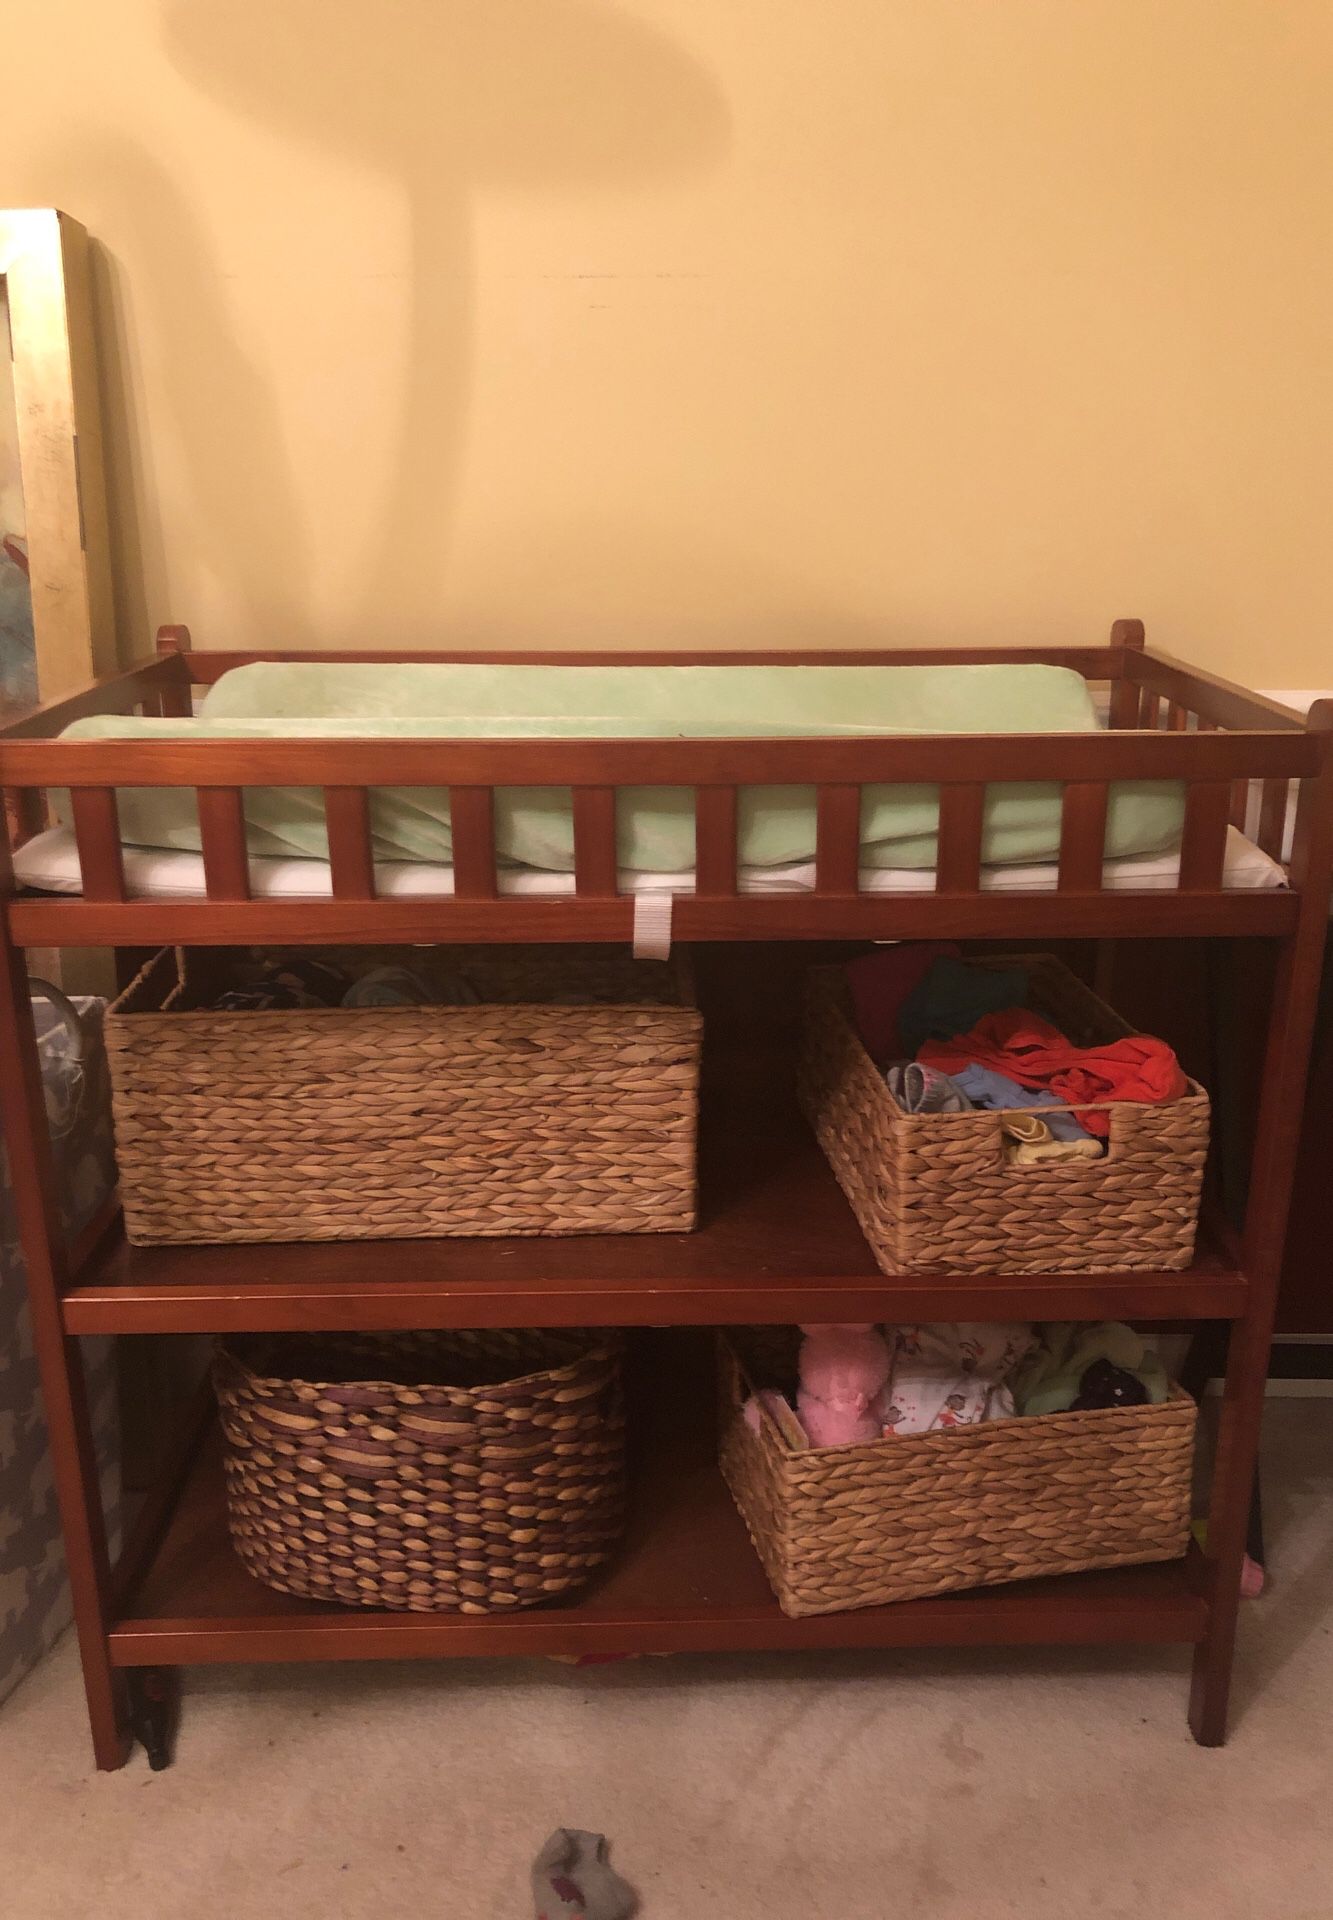 Changing table and storage baskets.